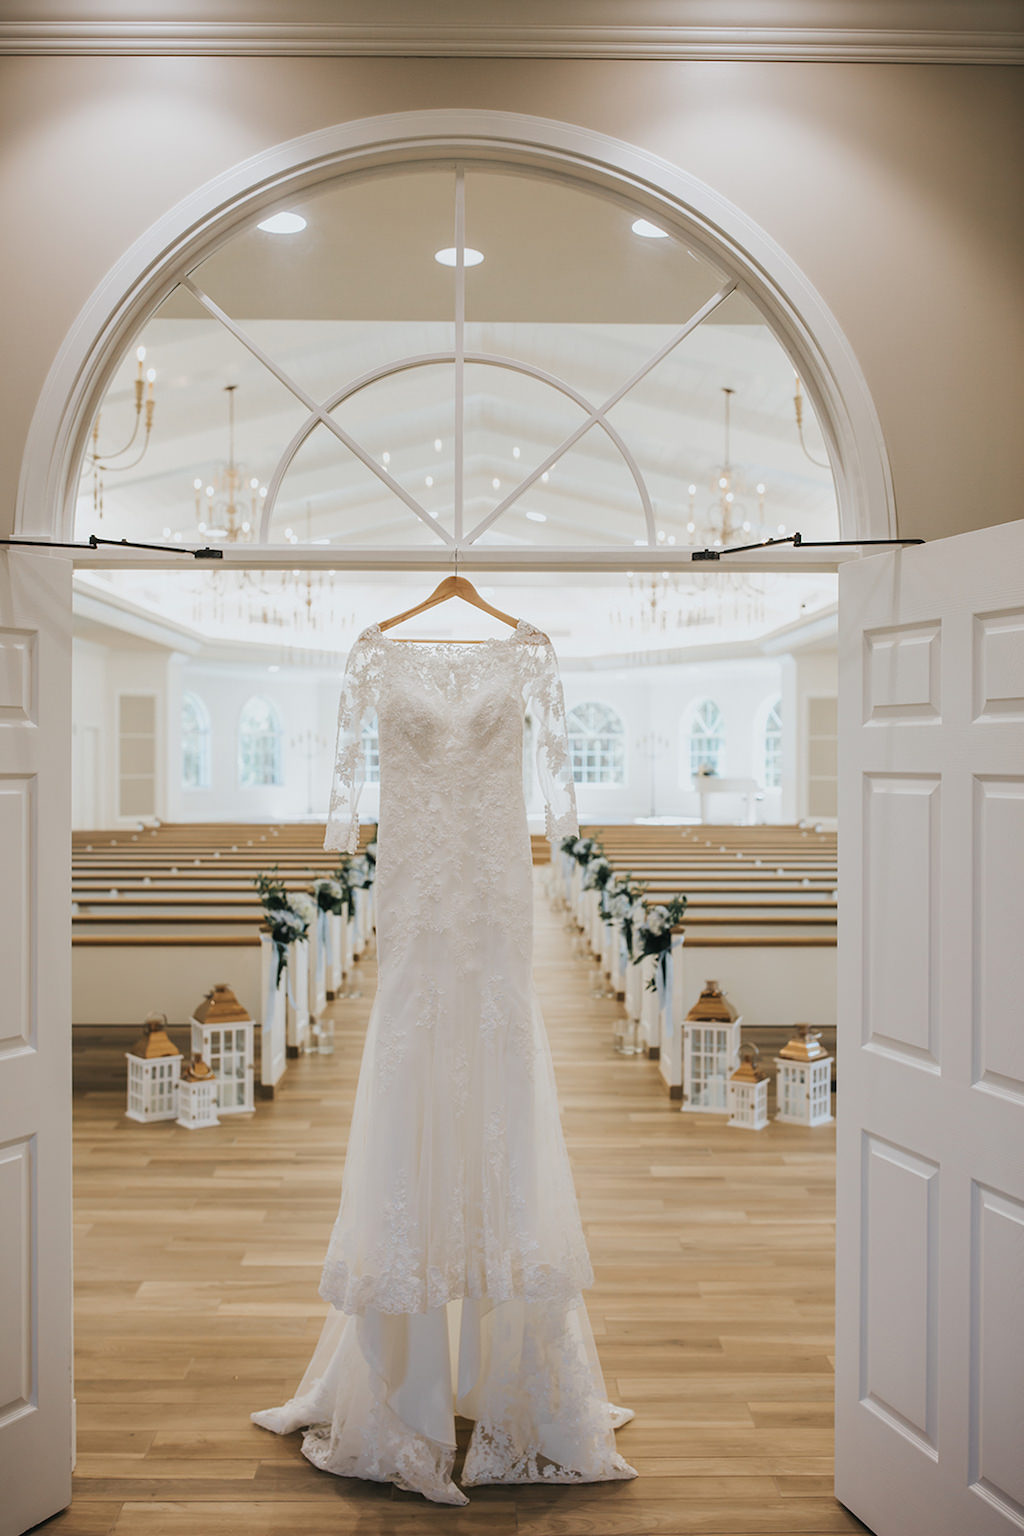 White Stella York Lace Wedding Dress with Long Sleeves Hanging on Wooden Hanger in Venue | Safety Harbor Wedding Ceremony Venue Harborside Chapel